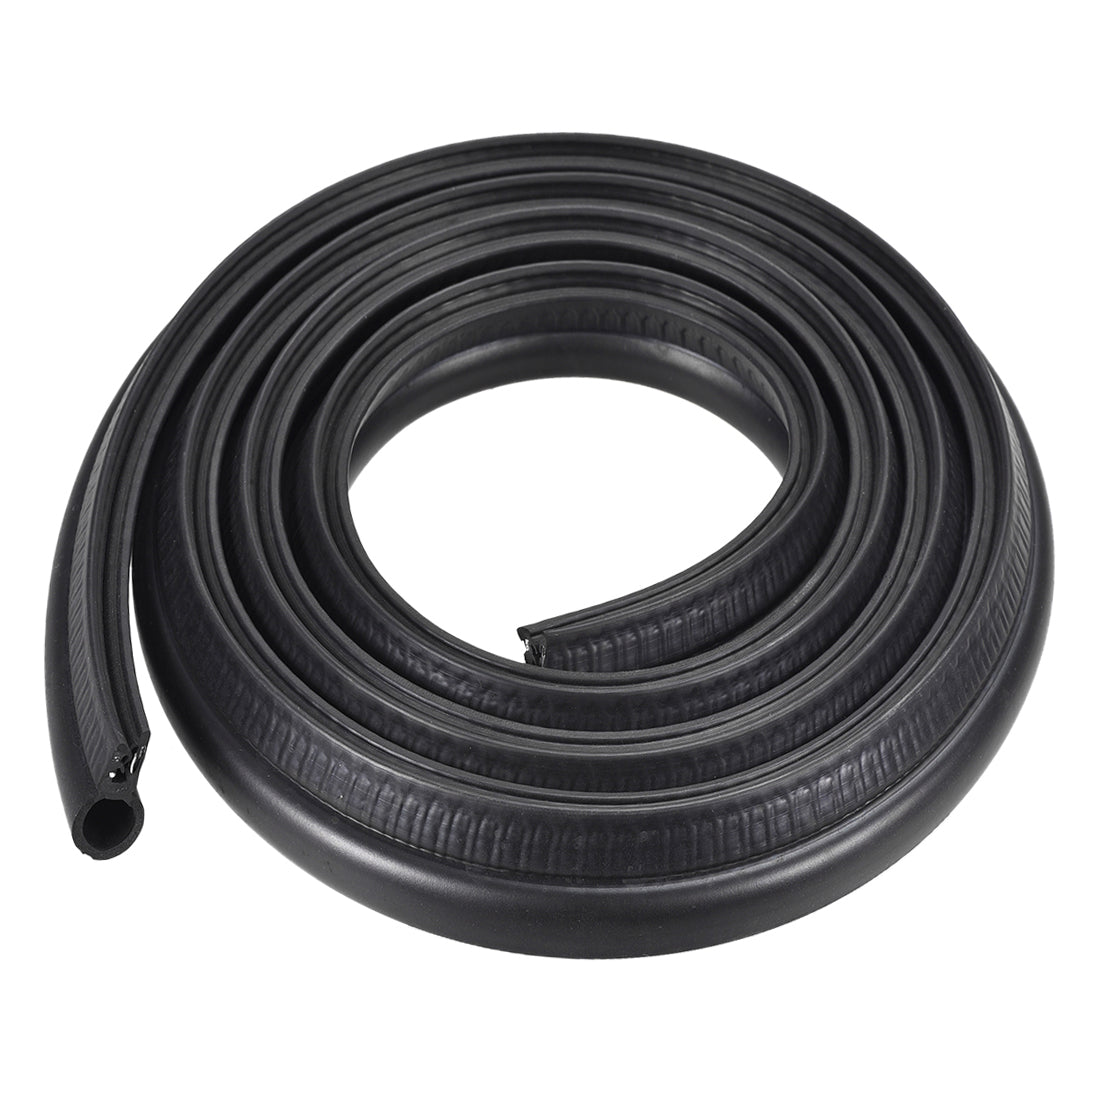 uxcell Uxcell Trim Seal with Top Bulb, EPDM Rubber Seal Channel Edge Protector Sheet, Fits